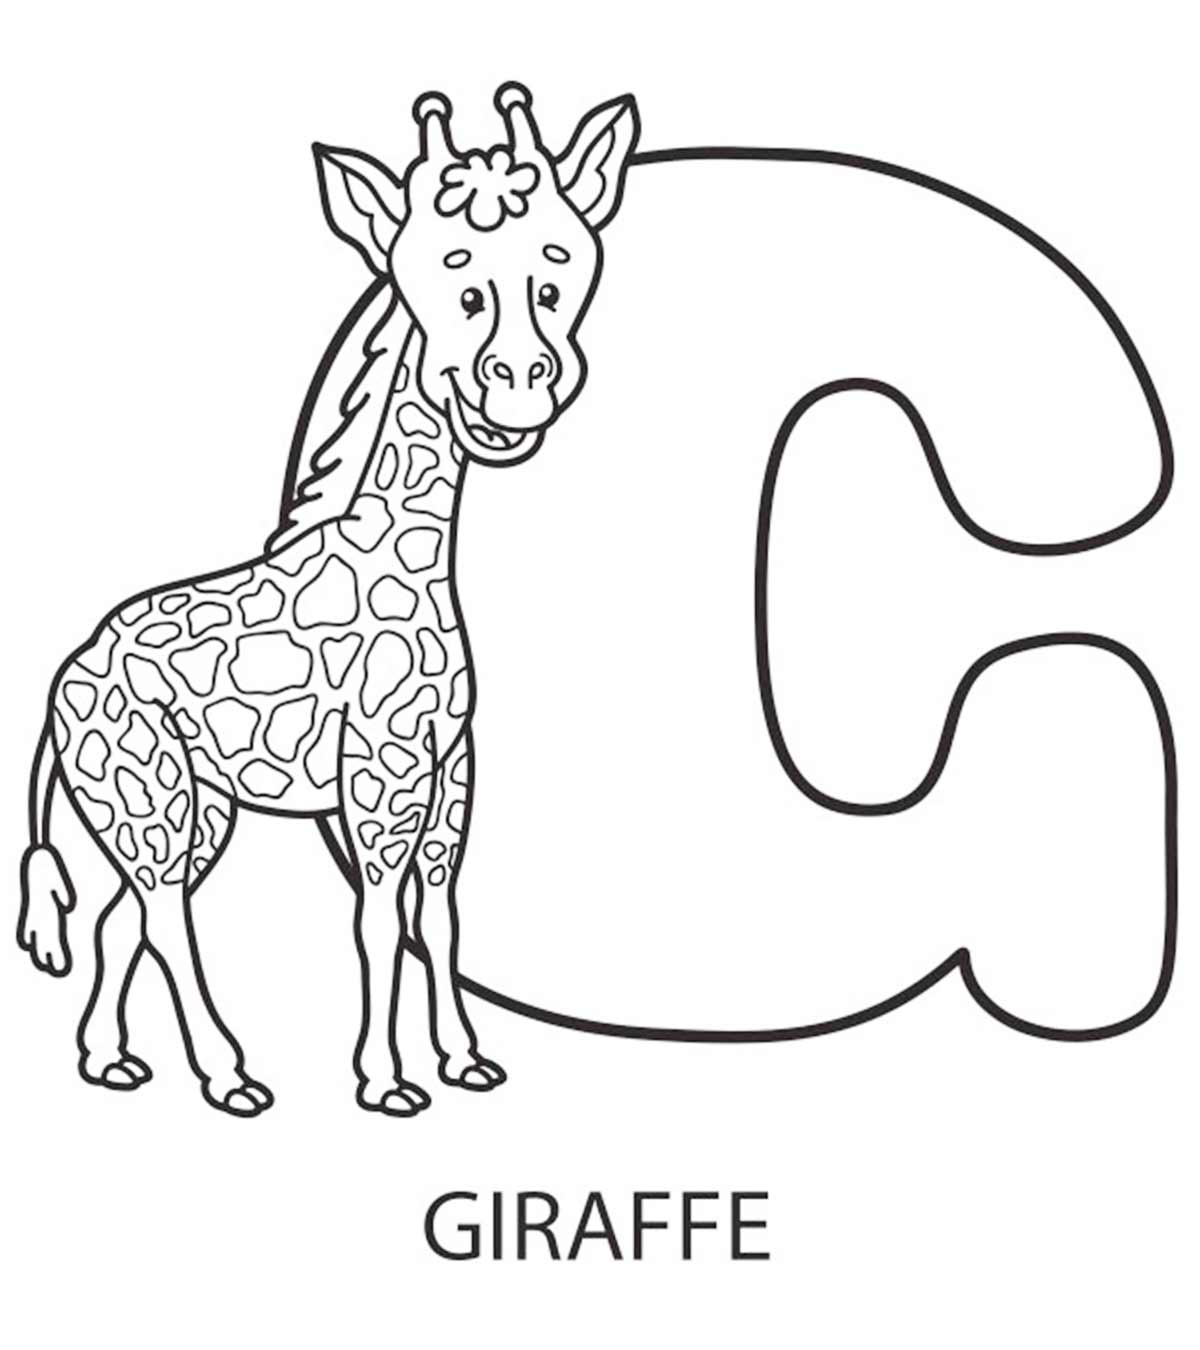 46 Top Animal Alphabet Coloring Pages  Images